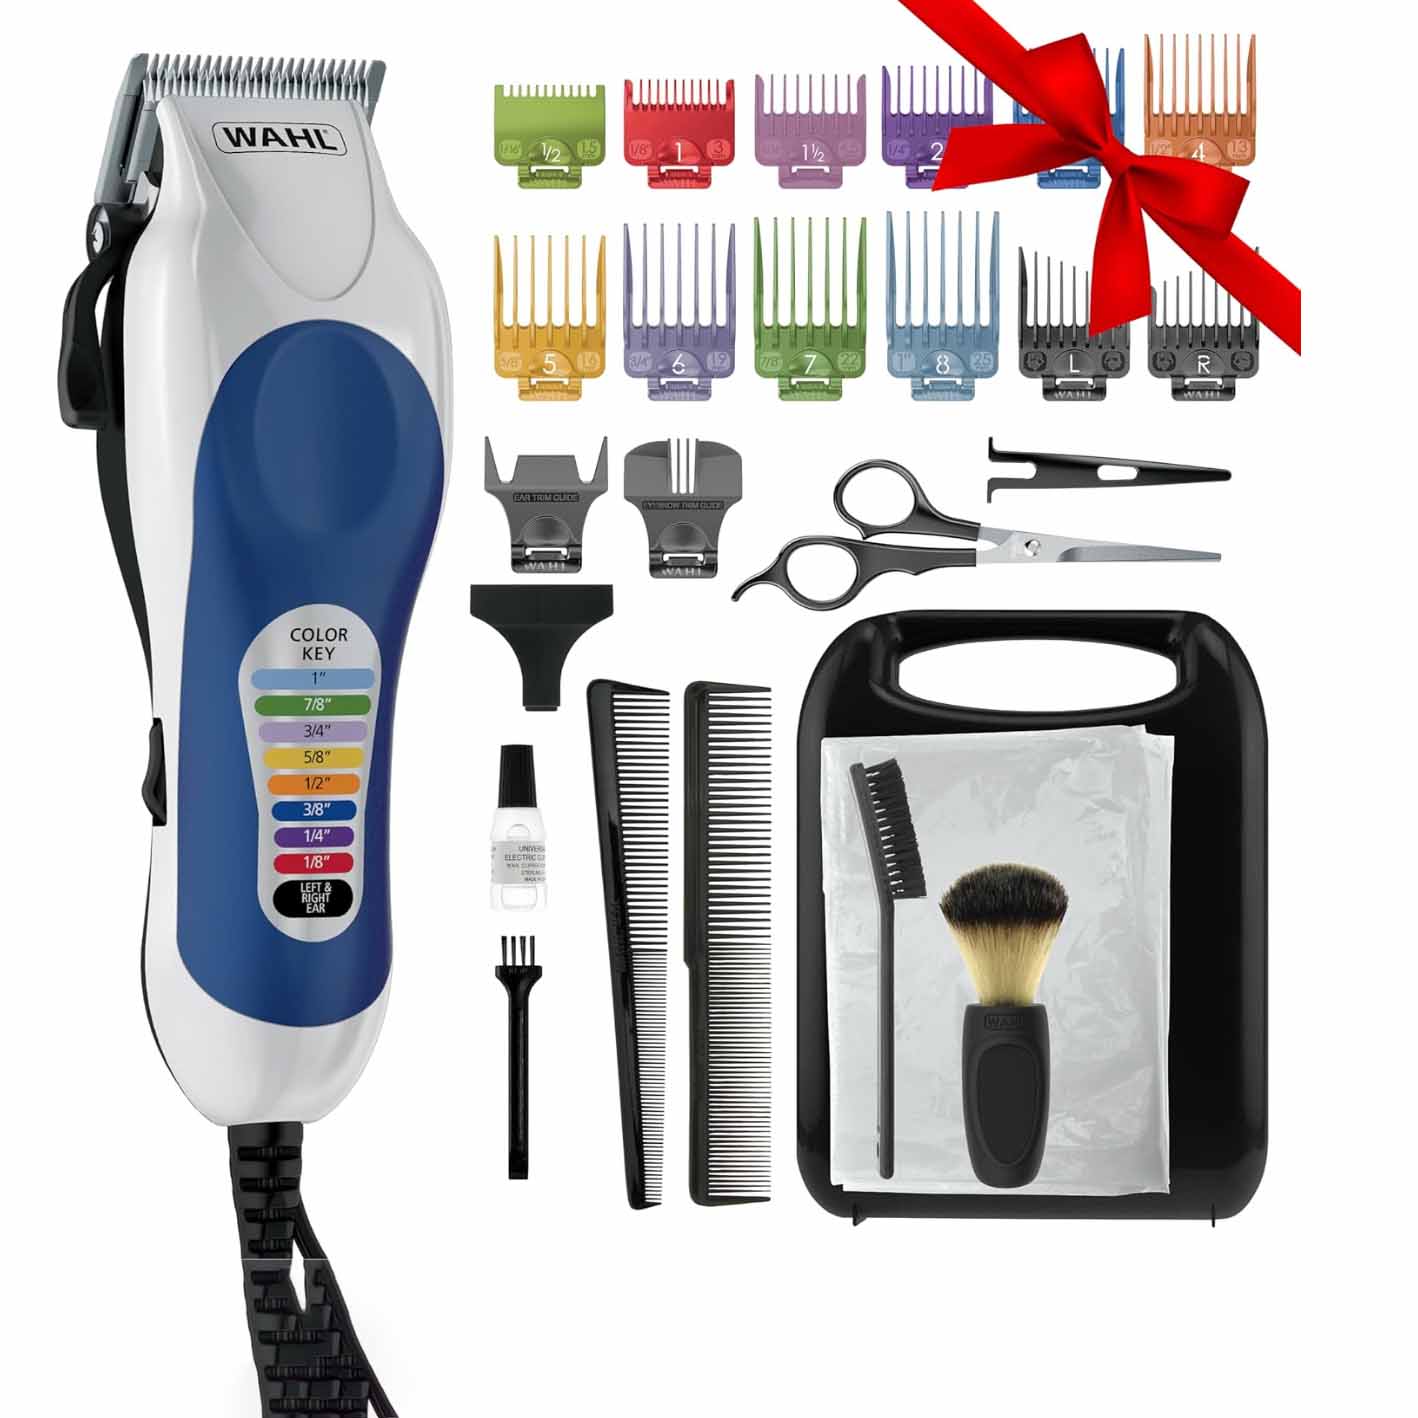 Wahl Trimmers with accessories